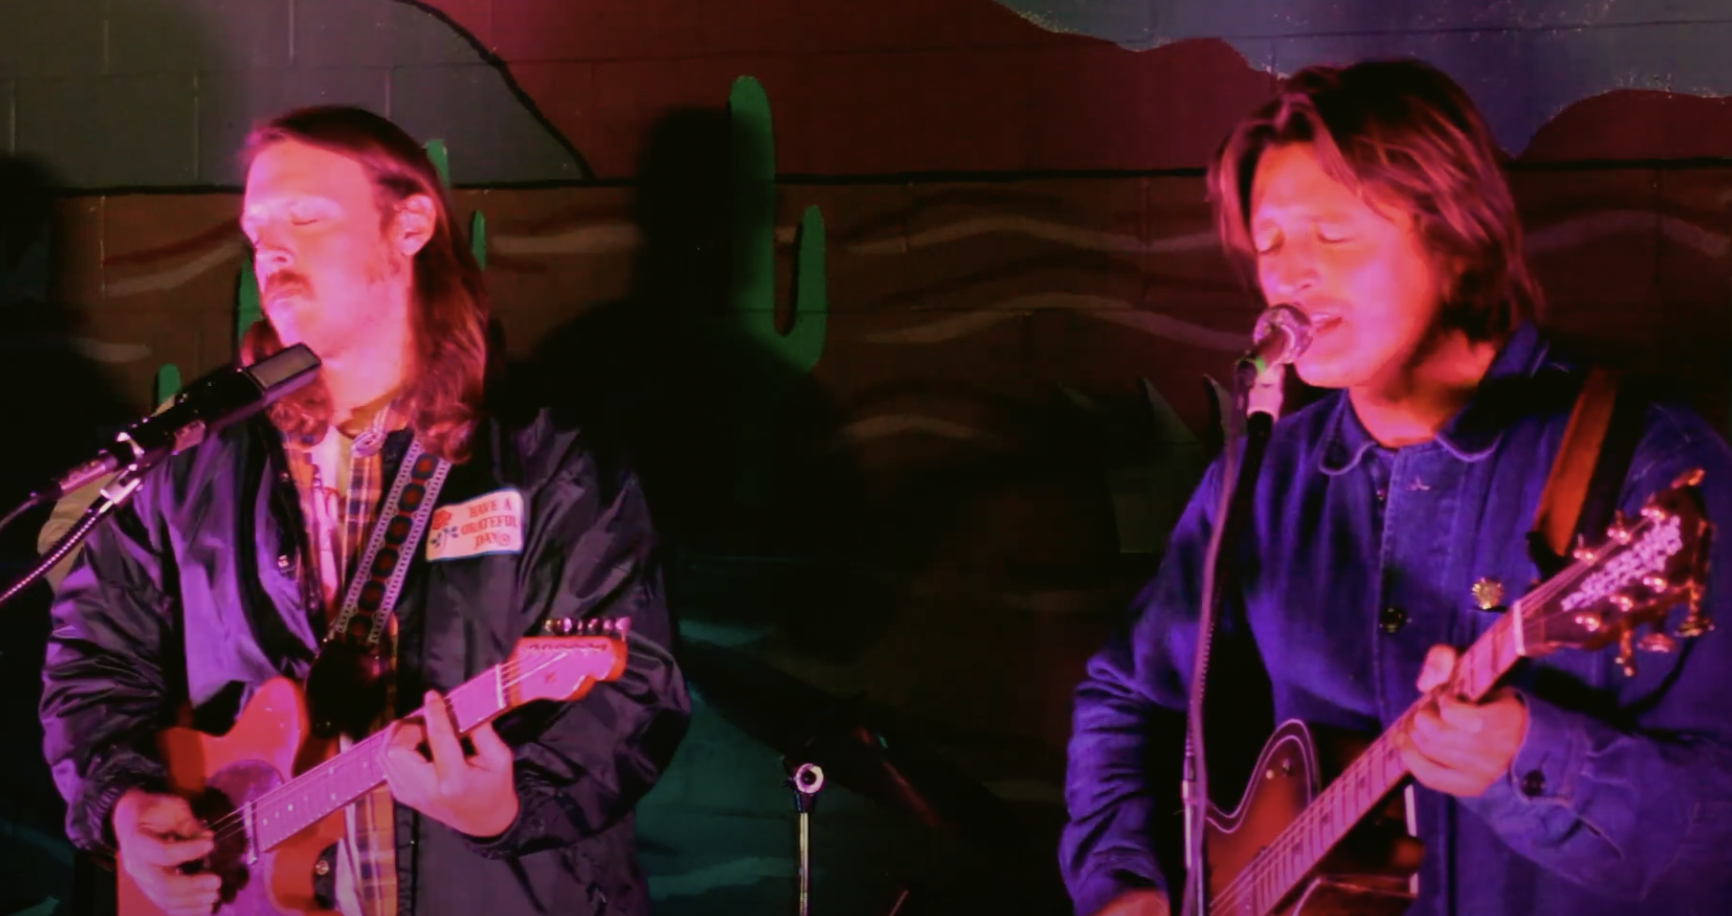 Video Premiere: “They Love Each Other” from Grateful Shred’s 4/20 Special